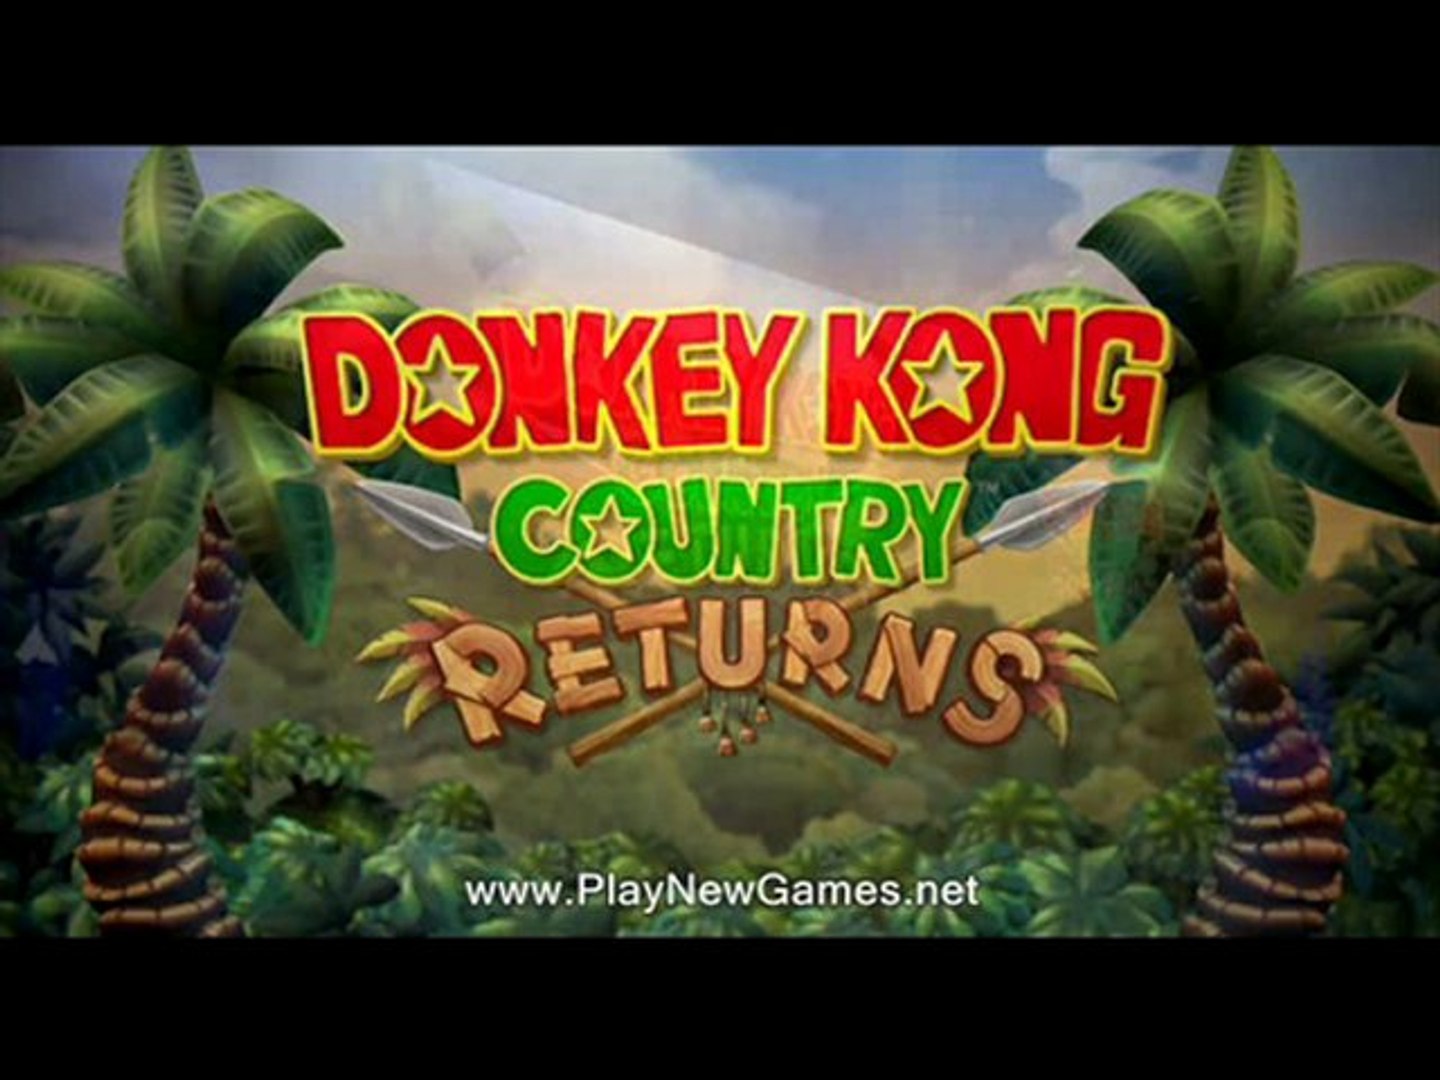 Donkey kong country 4 download torrent